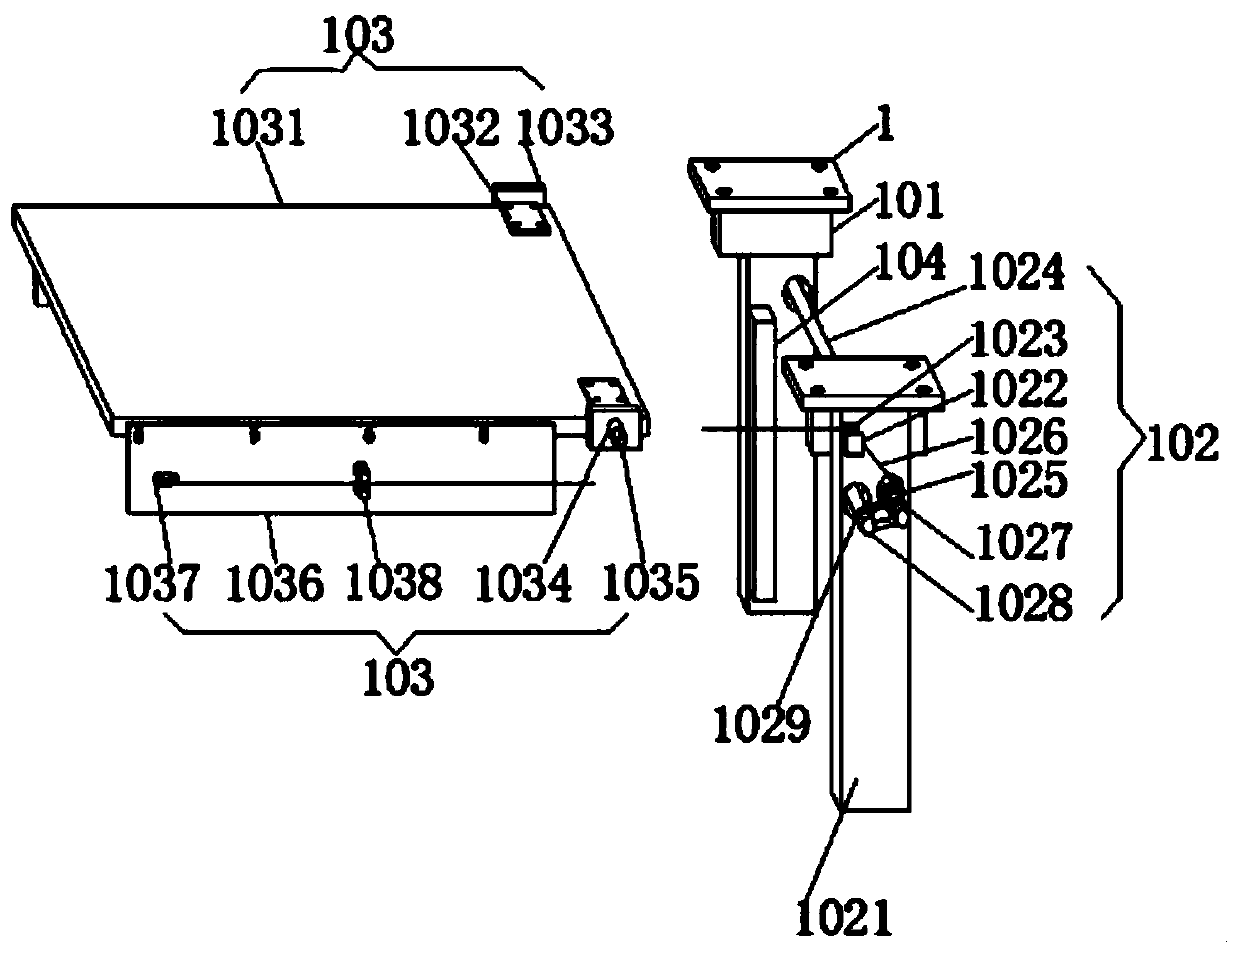 Extendible indoor balcony expansion equipment and method